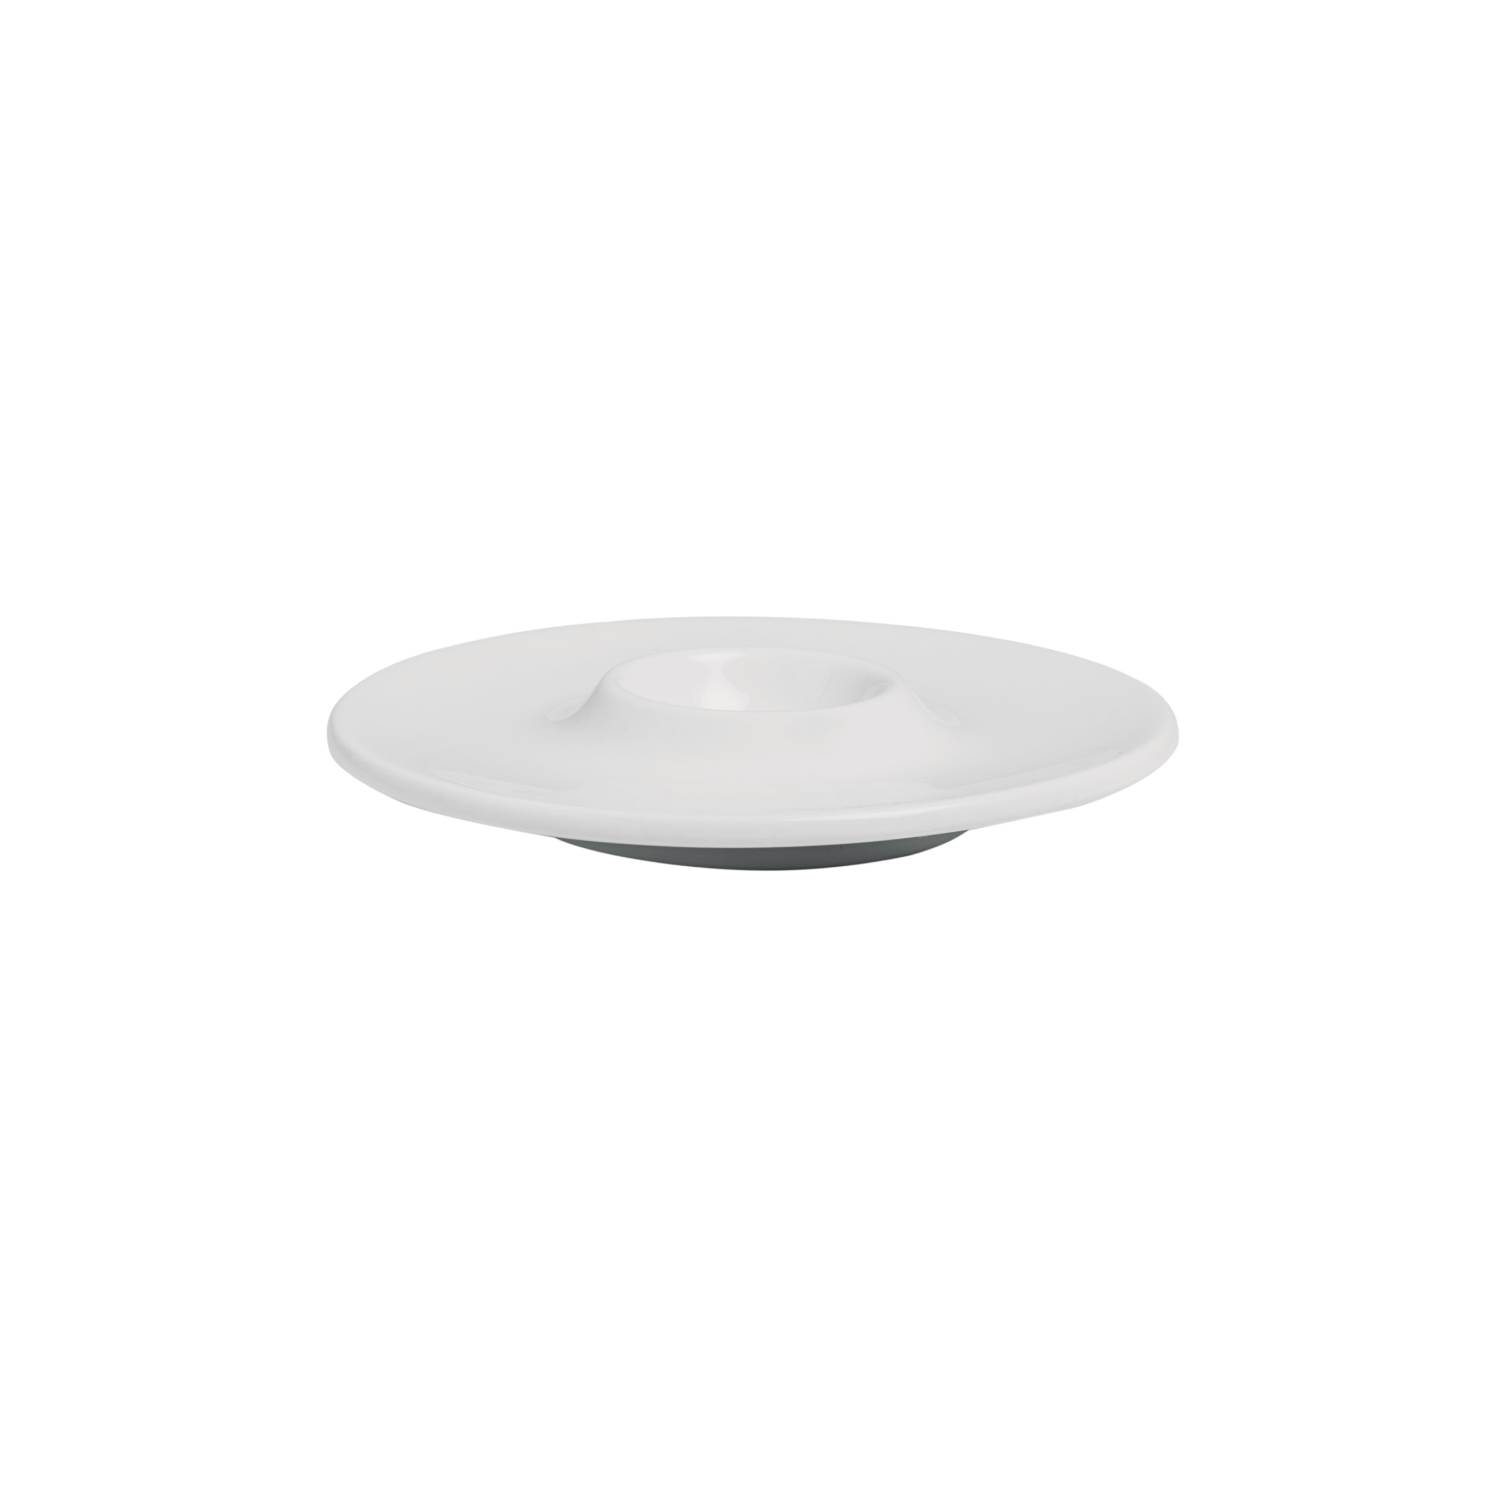 Baralee Simple Plus Egg Cup 12 Cm (4 3/4")